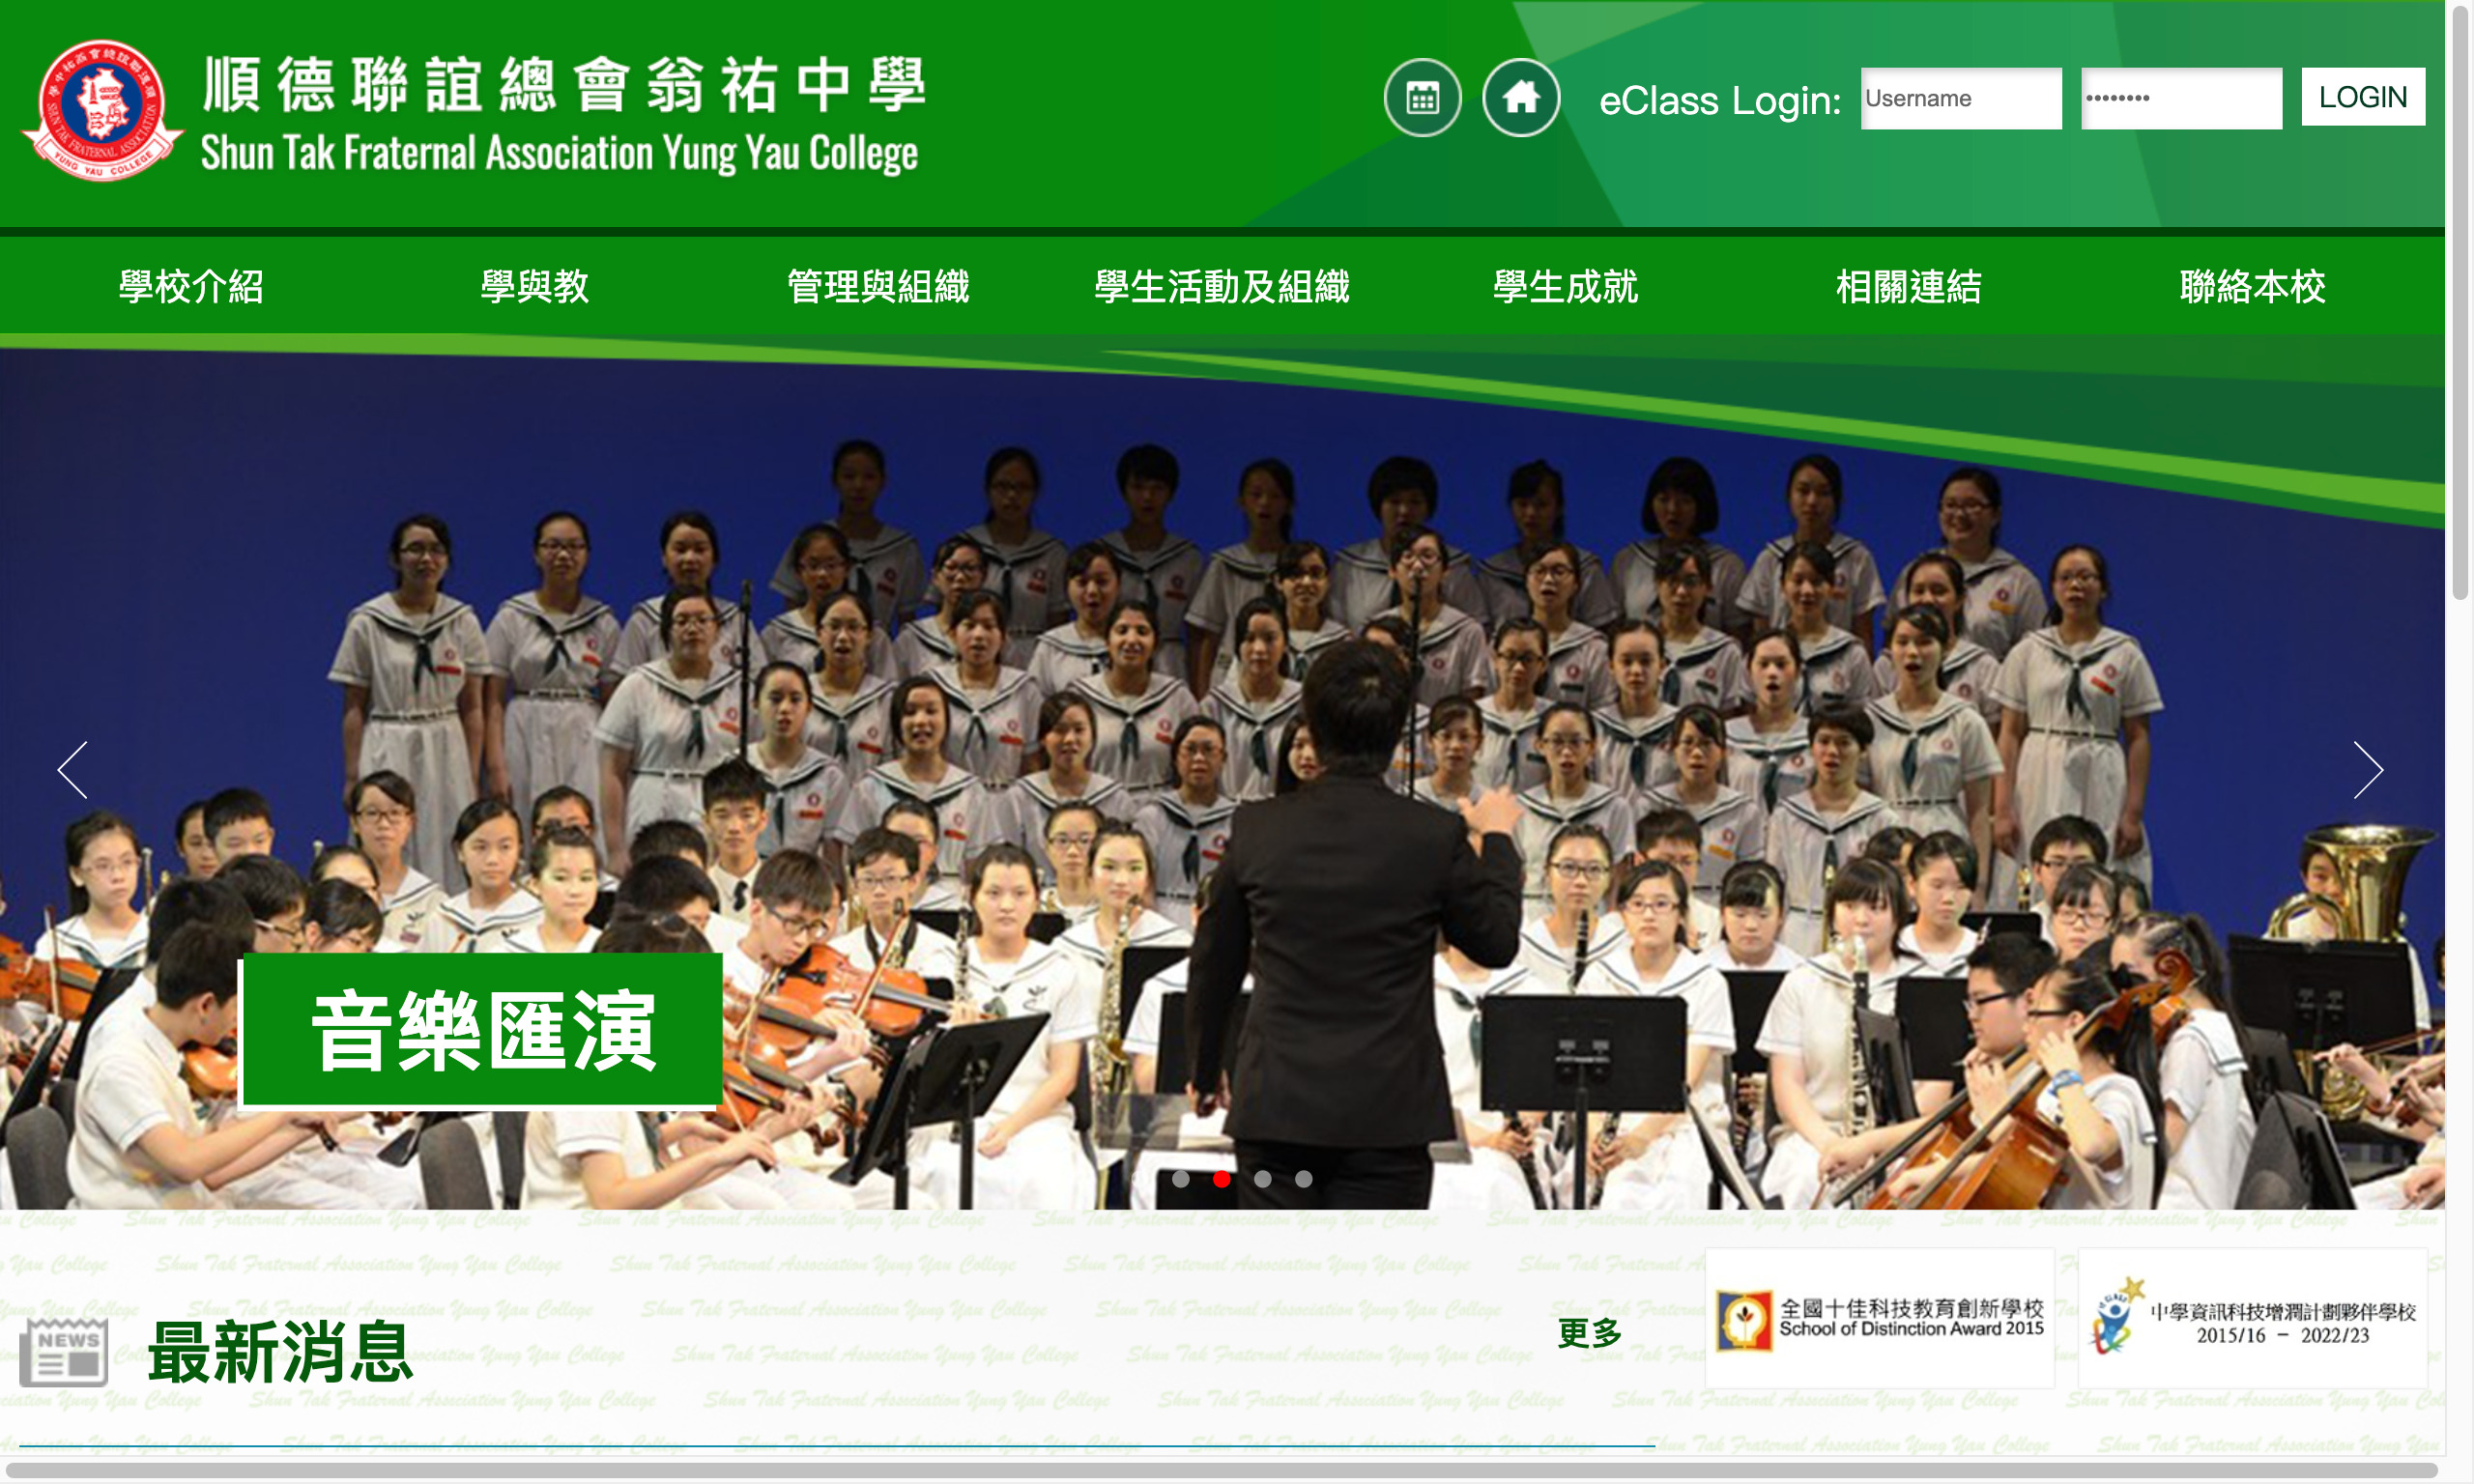 Screenshot of the Home Page of Shun Tak Fraternal Association Yung Yau College